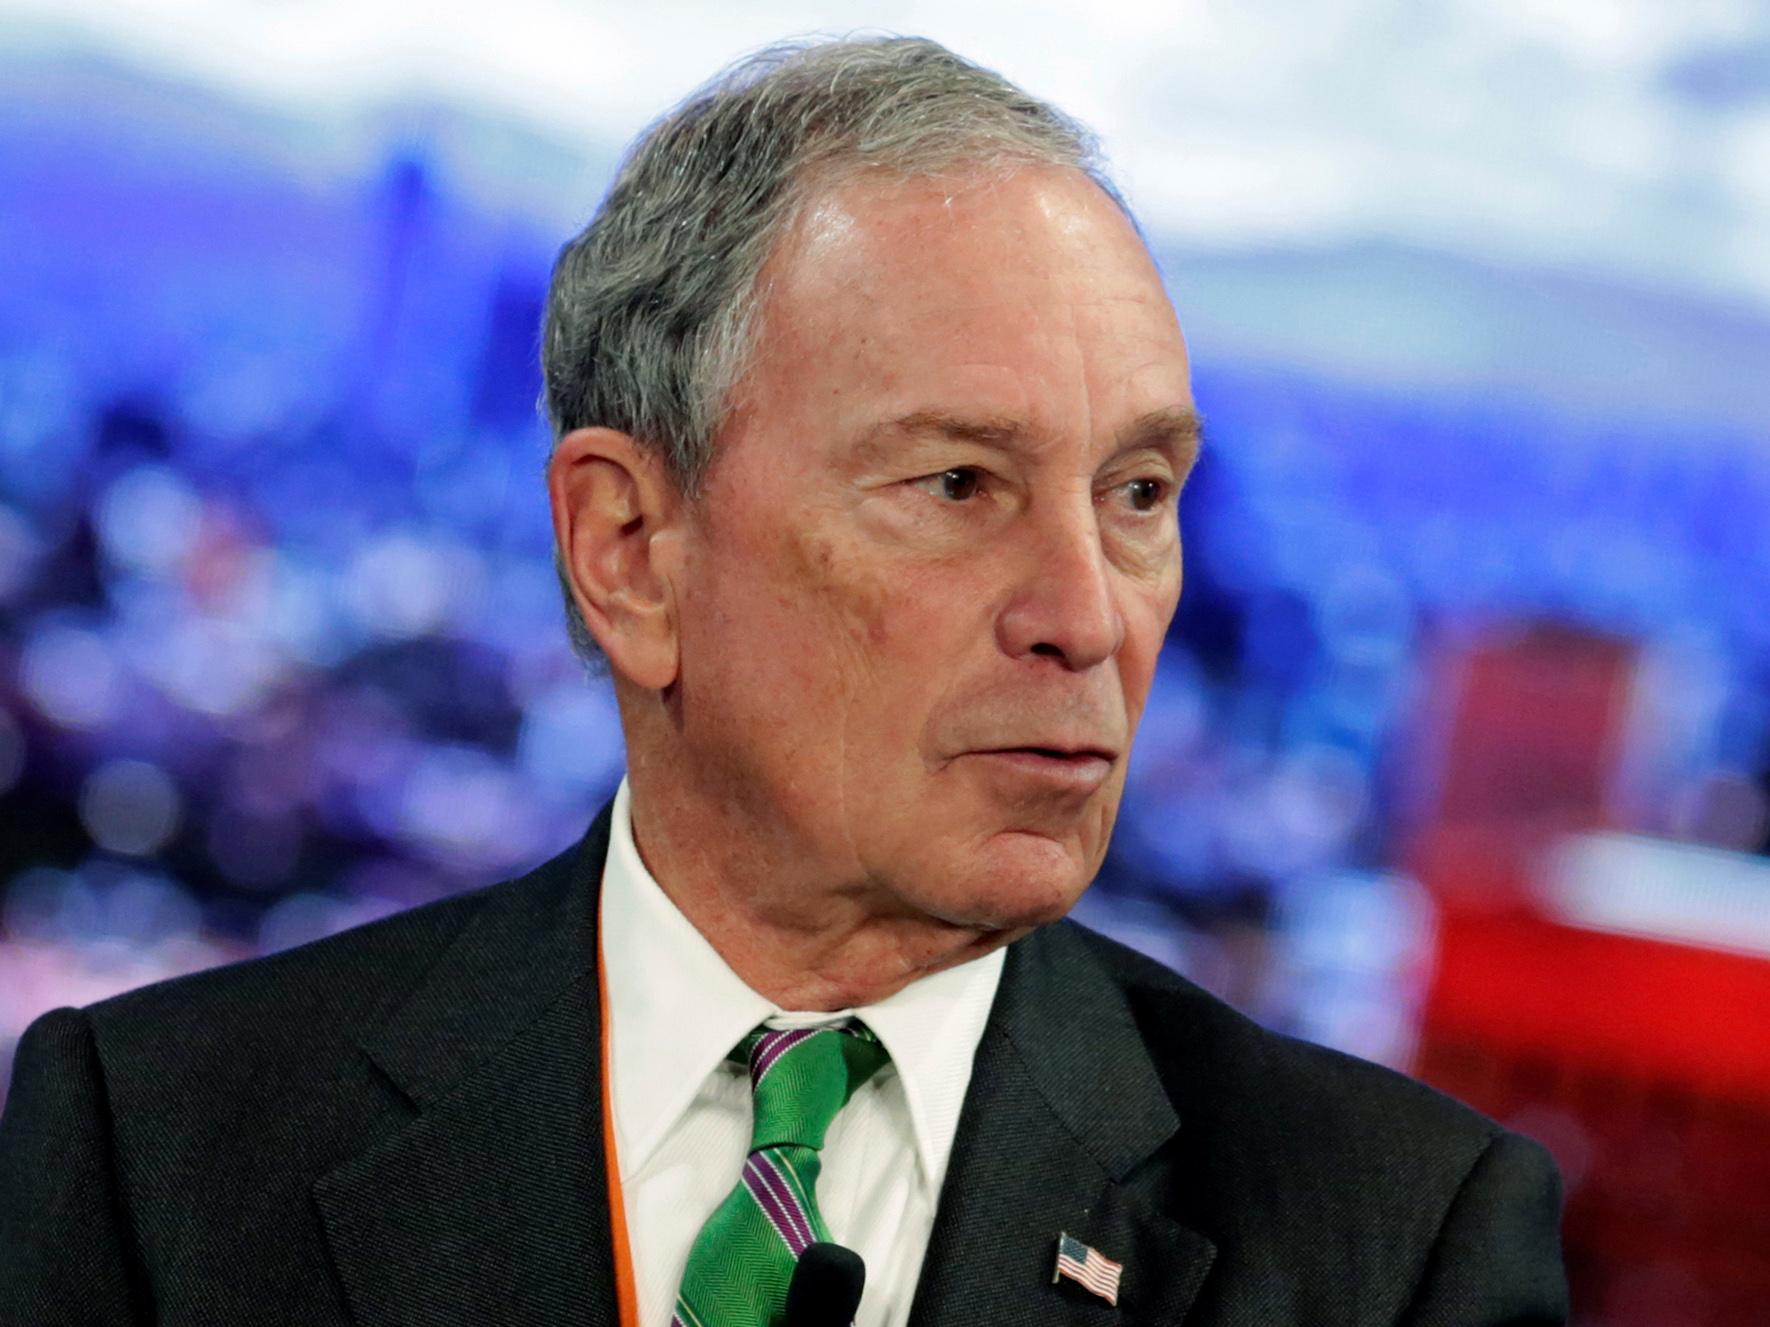 Forbes currently estimates Mr Bloomberg’s wealth at $47.5bn